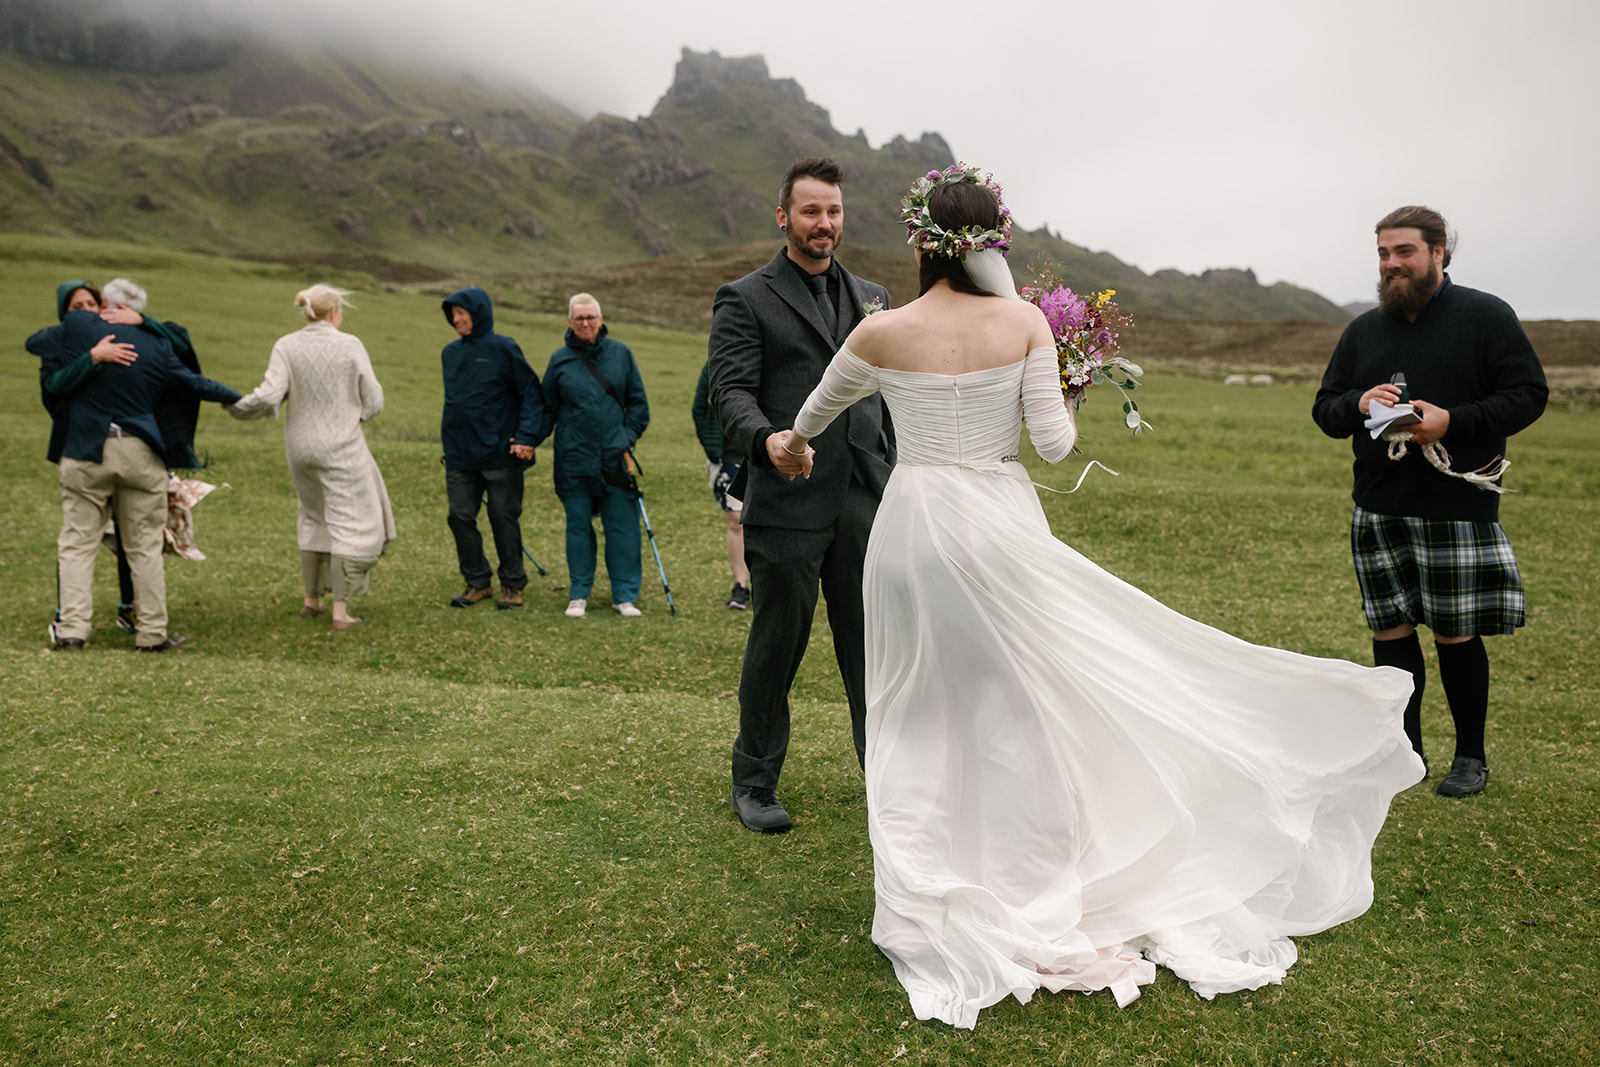 Nick's face lights up as he lays eyes on Becca for the first time in her gown during their Isle of Skye elopement 